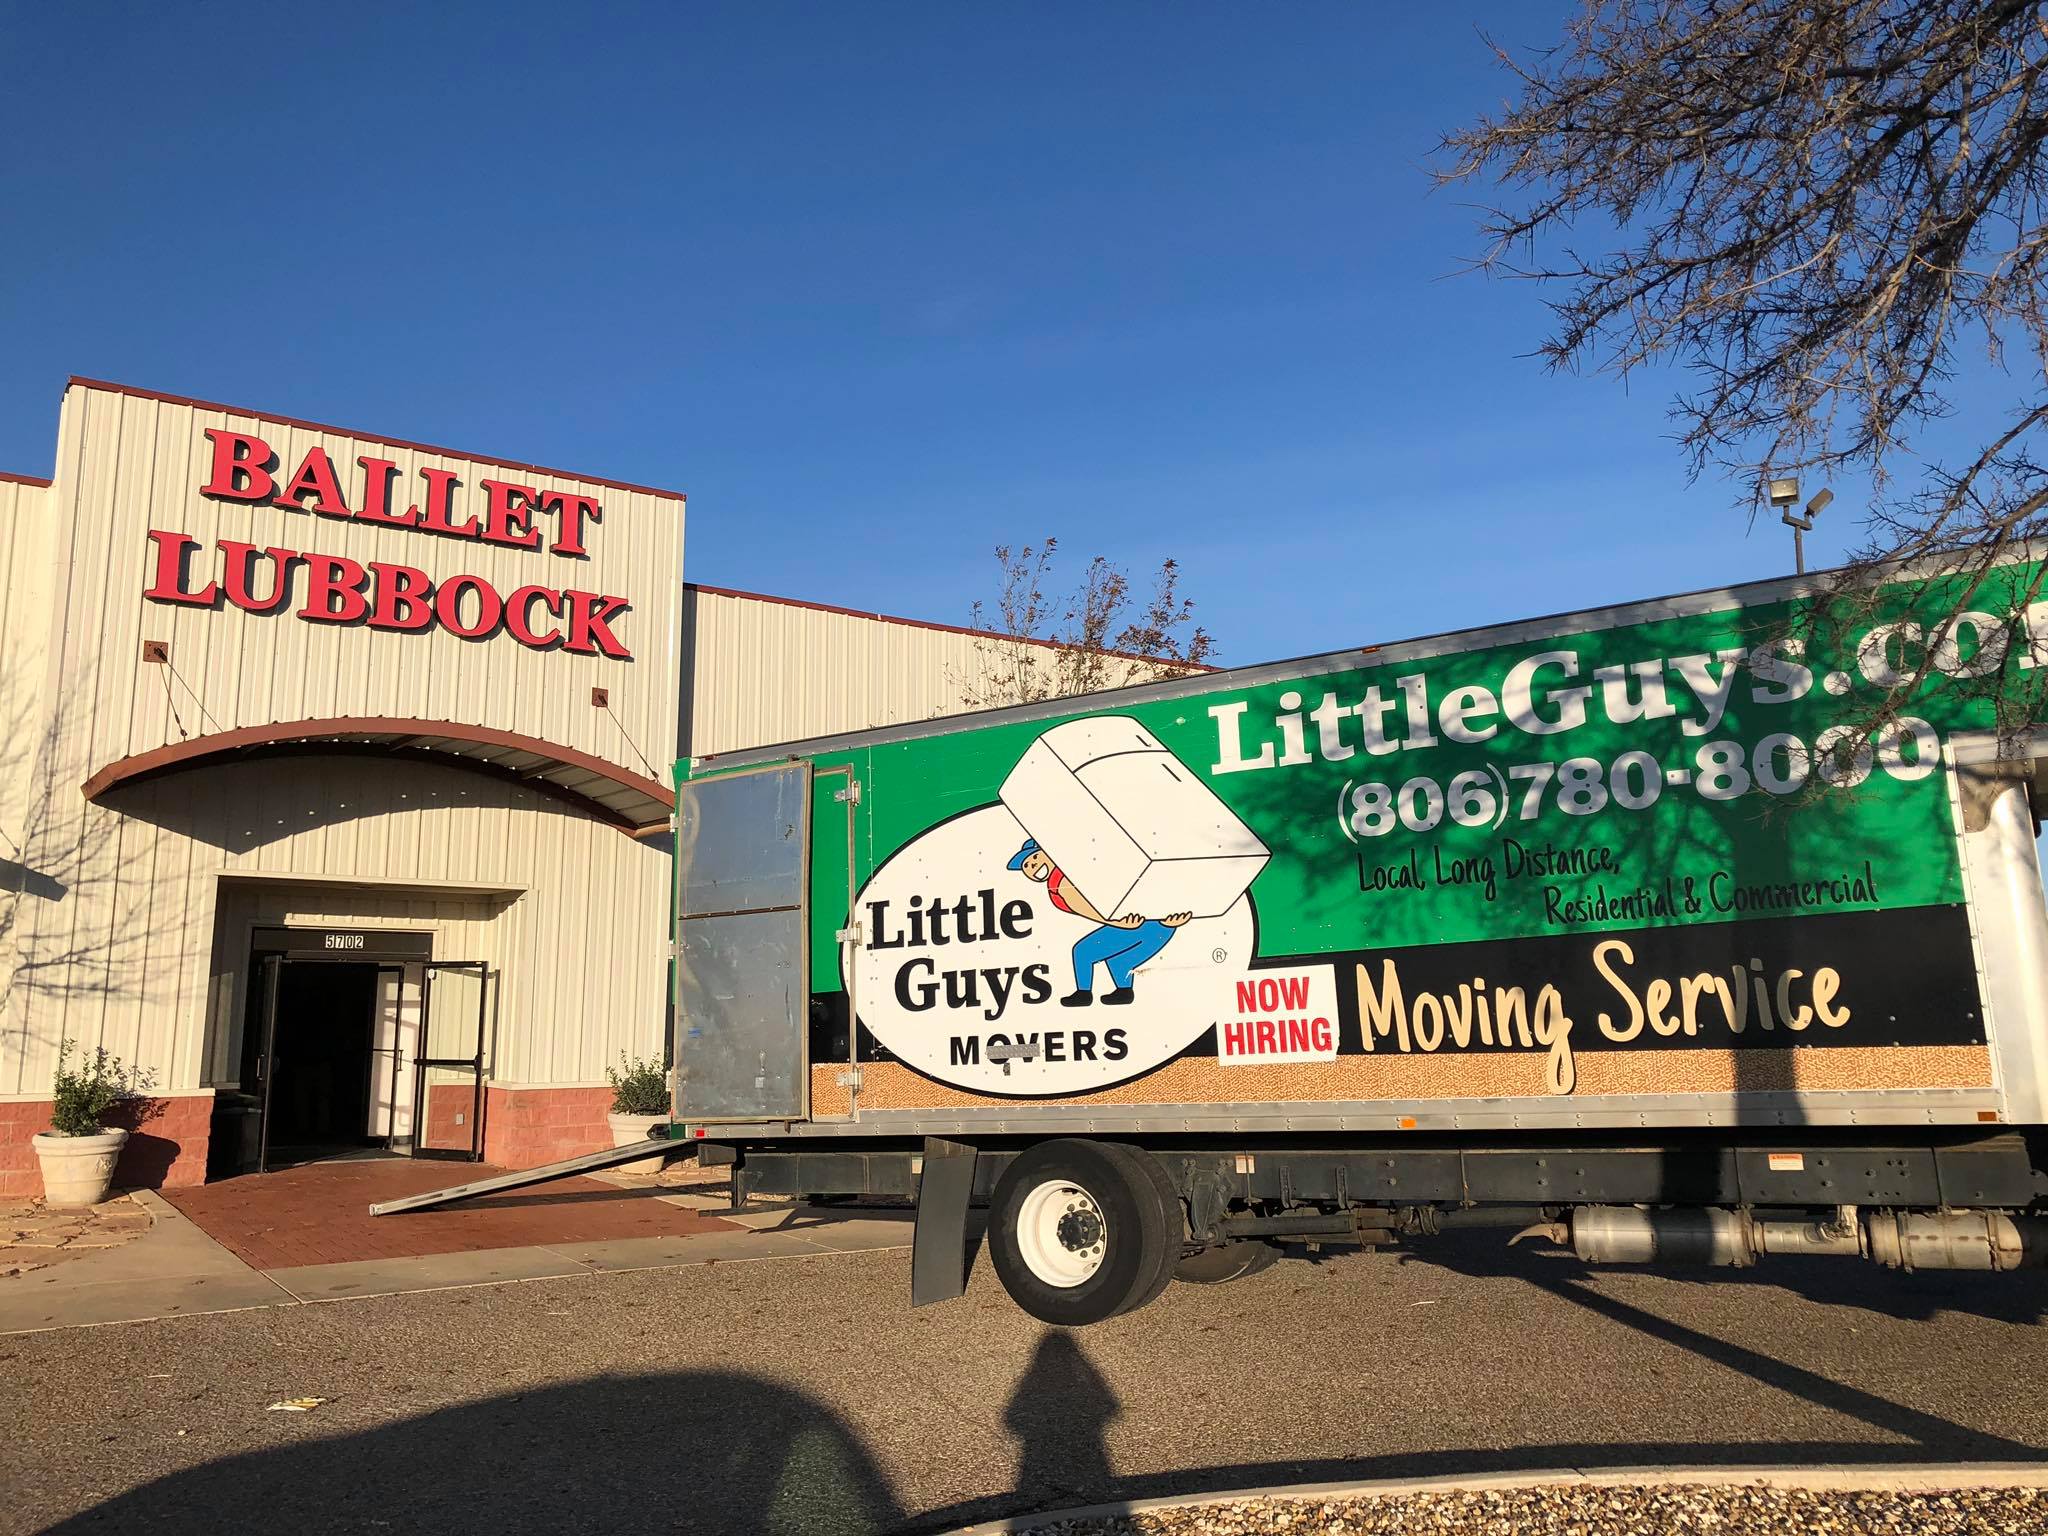 Little Guys Movers truck in front of Ballet Lubbock building